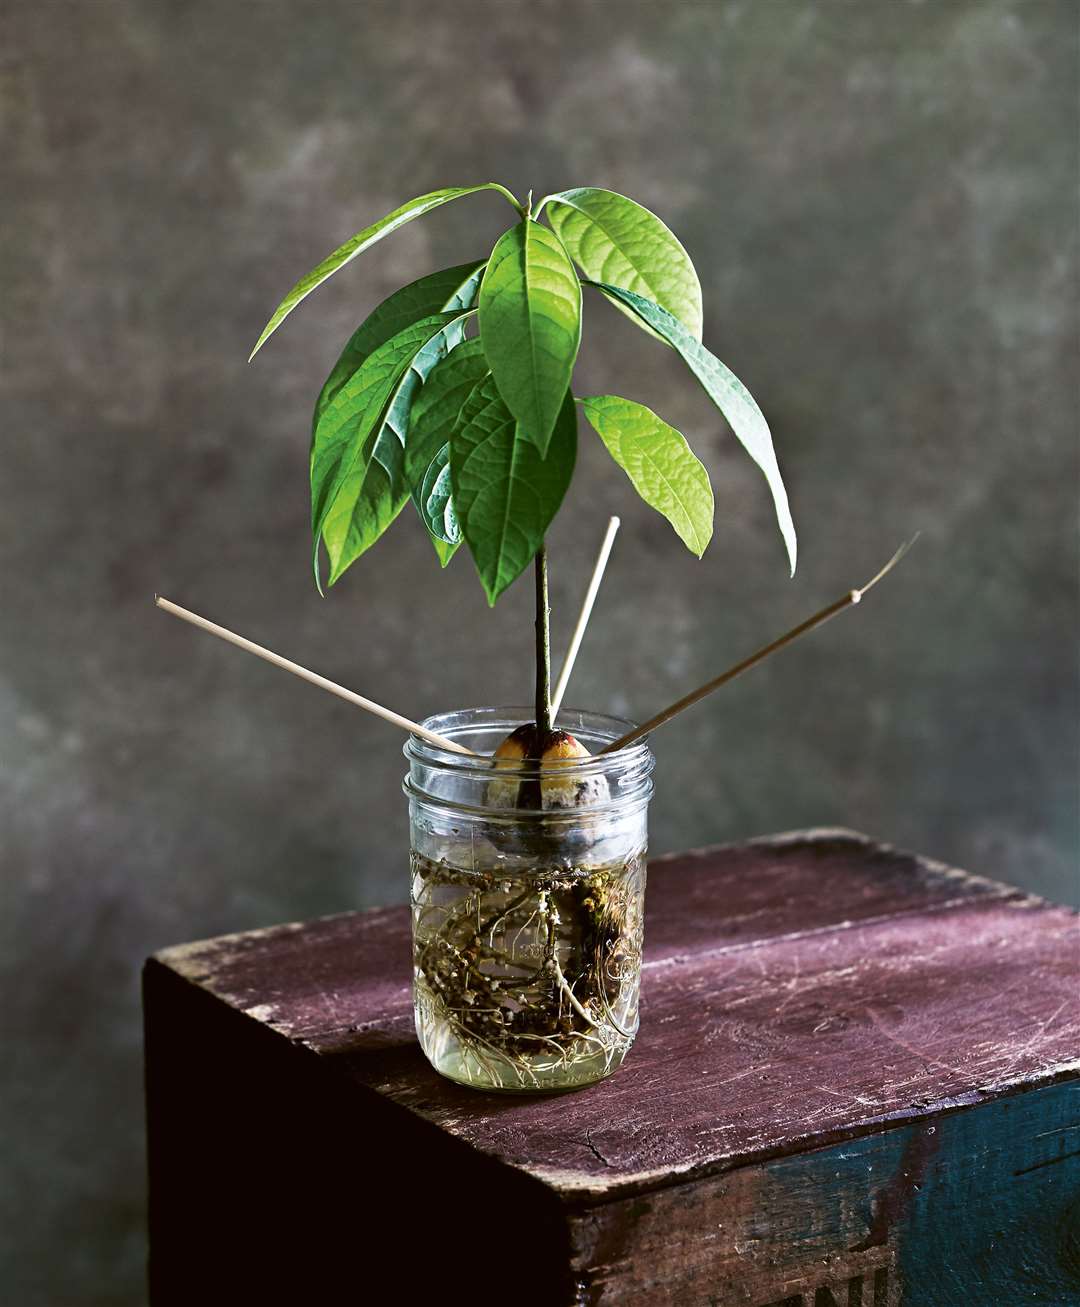 An avocado plant growing from a stone. Picture: Kim Lightbody/PA